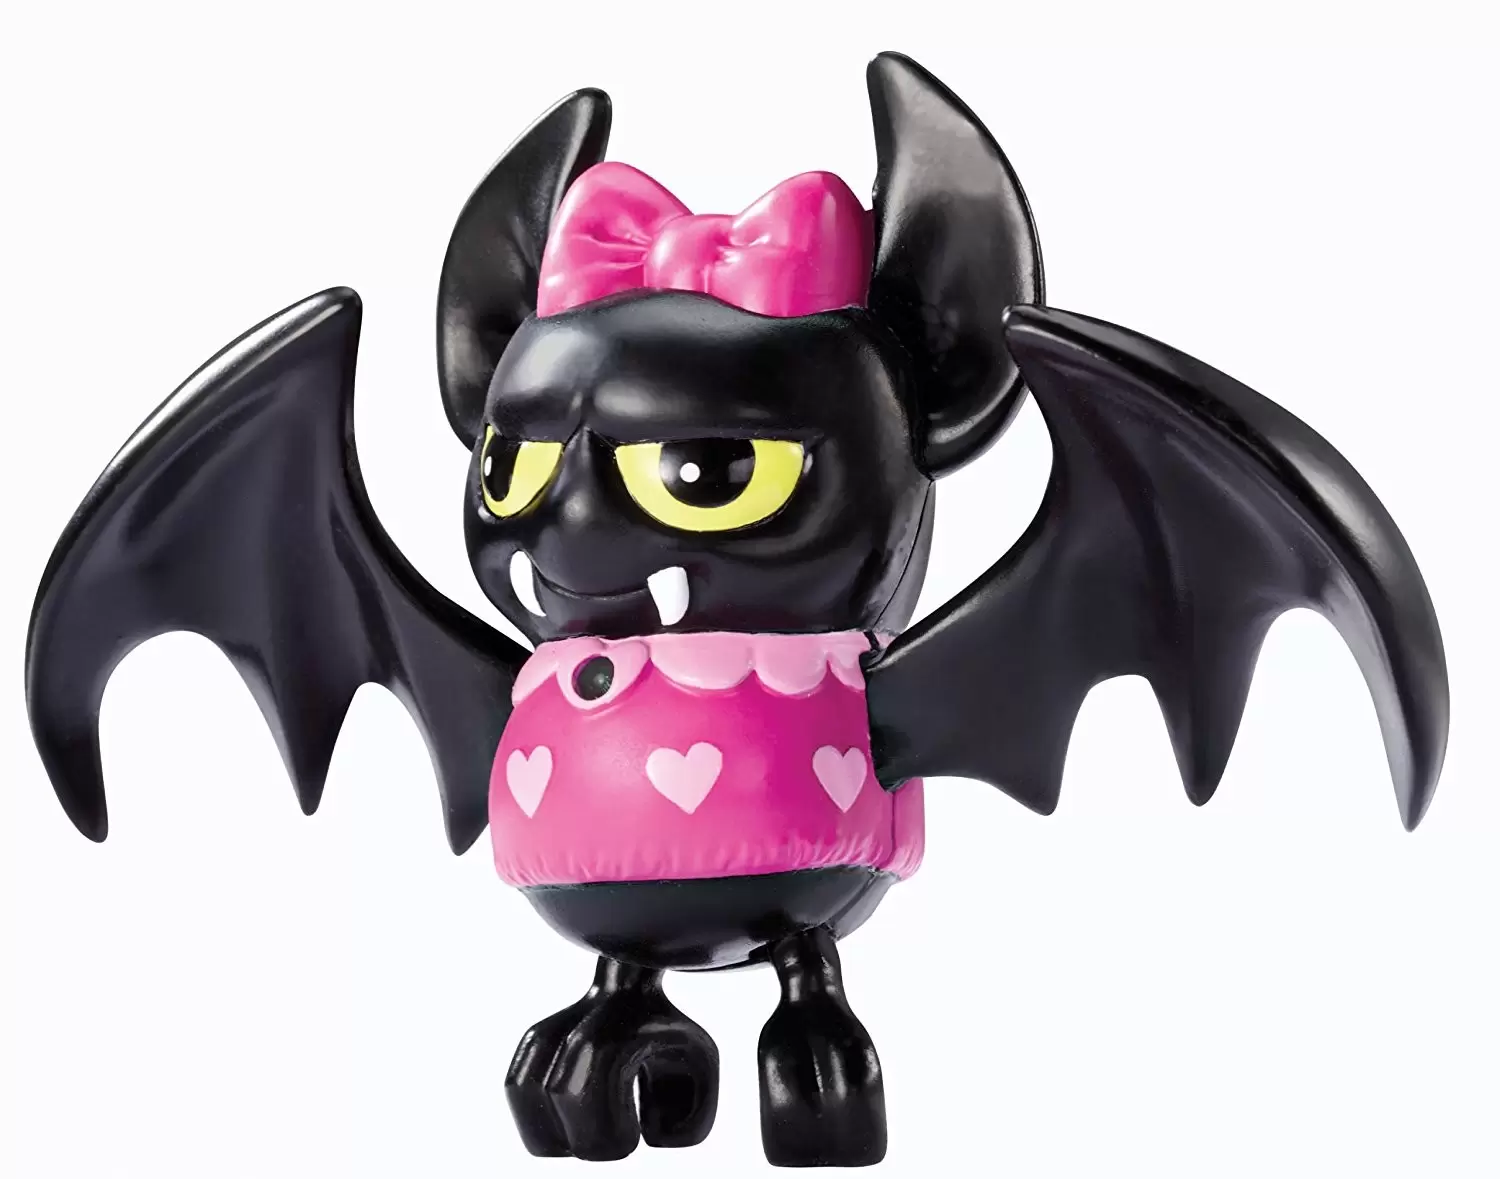 Monster High Dolls - Count Fabulous - Secret Creepers